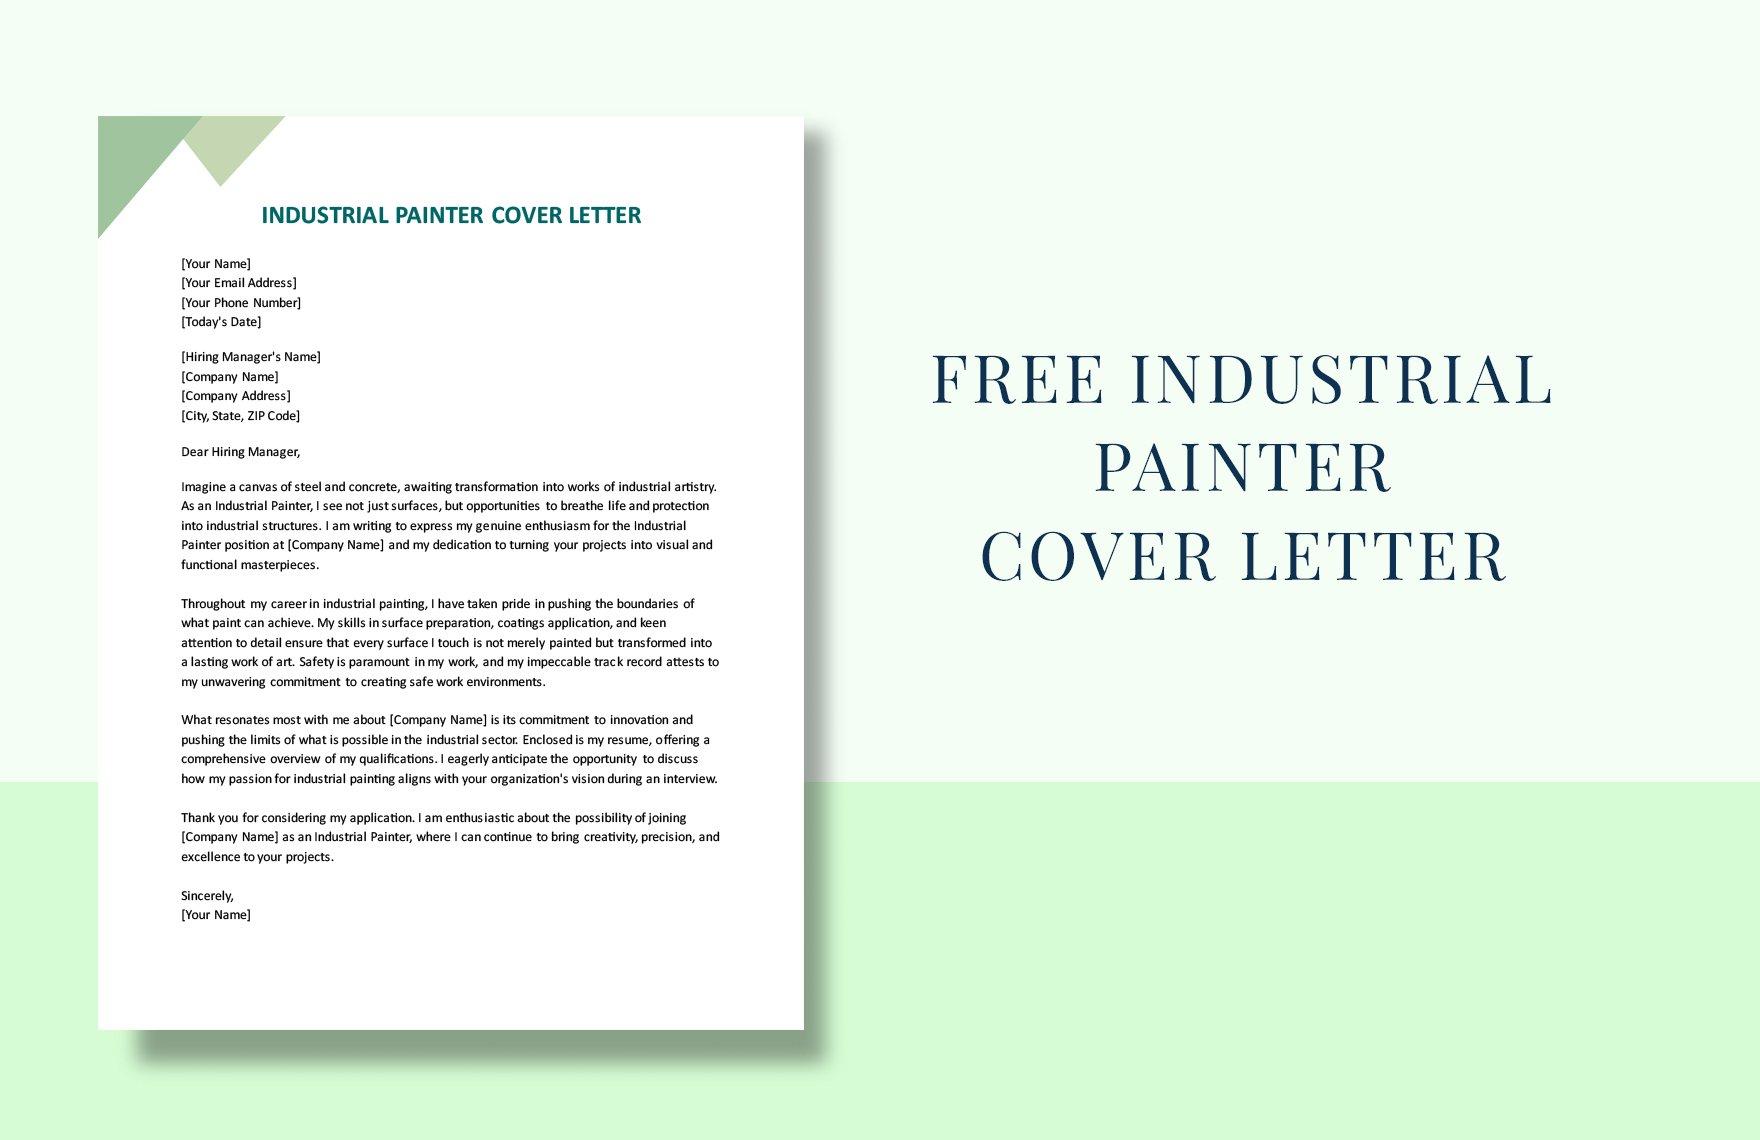 Industrial Painter Cover Letter in Word, Google Docs, PDF